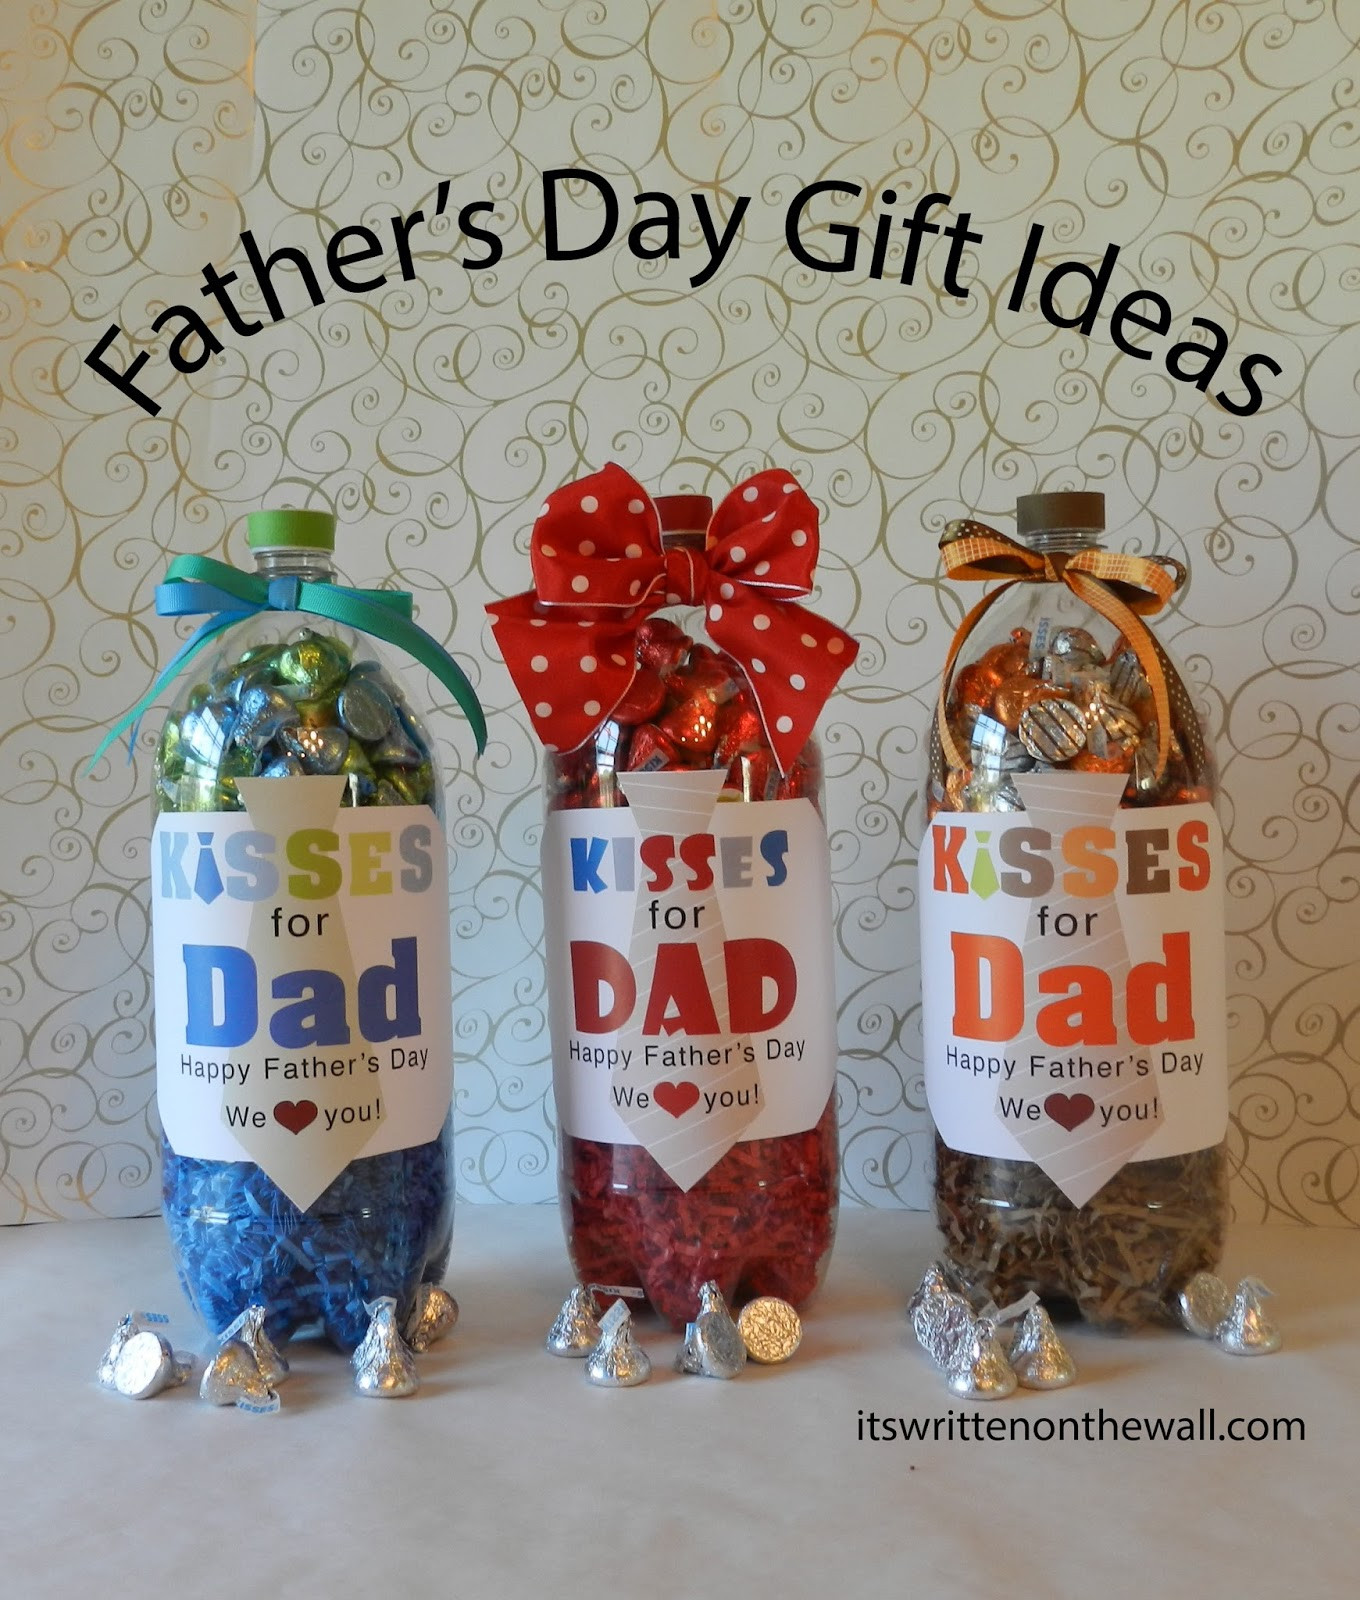 Ideas For Fathers Day Gifts
 It s Written on the Wall Fathers Day Gift Ideas For the